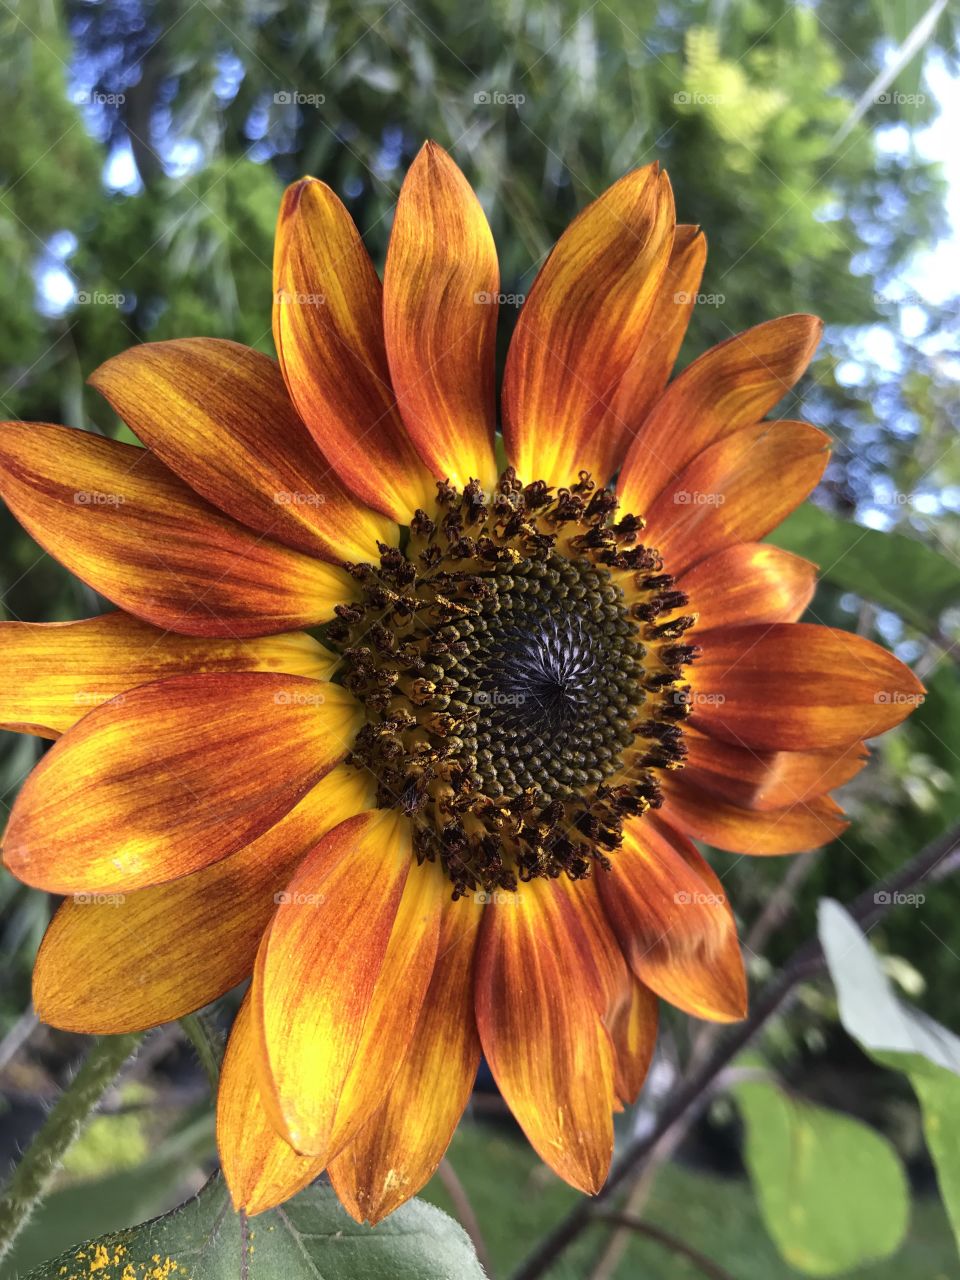 Advice from a sunflower. Stand tall. Hold strong. And always reach for the Sun!!! 